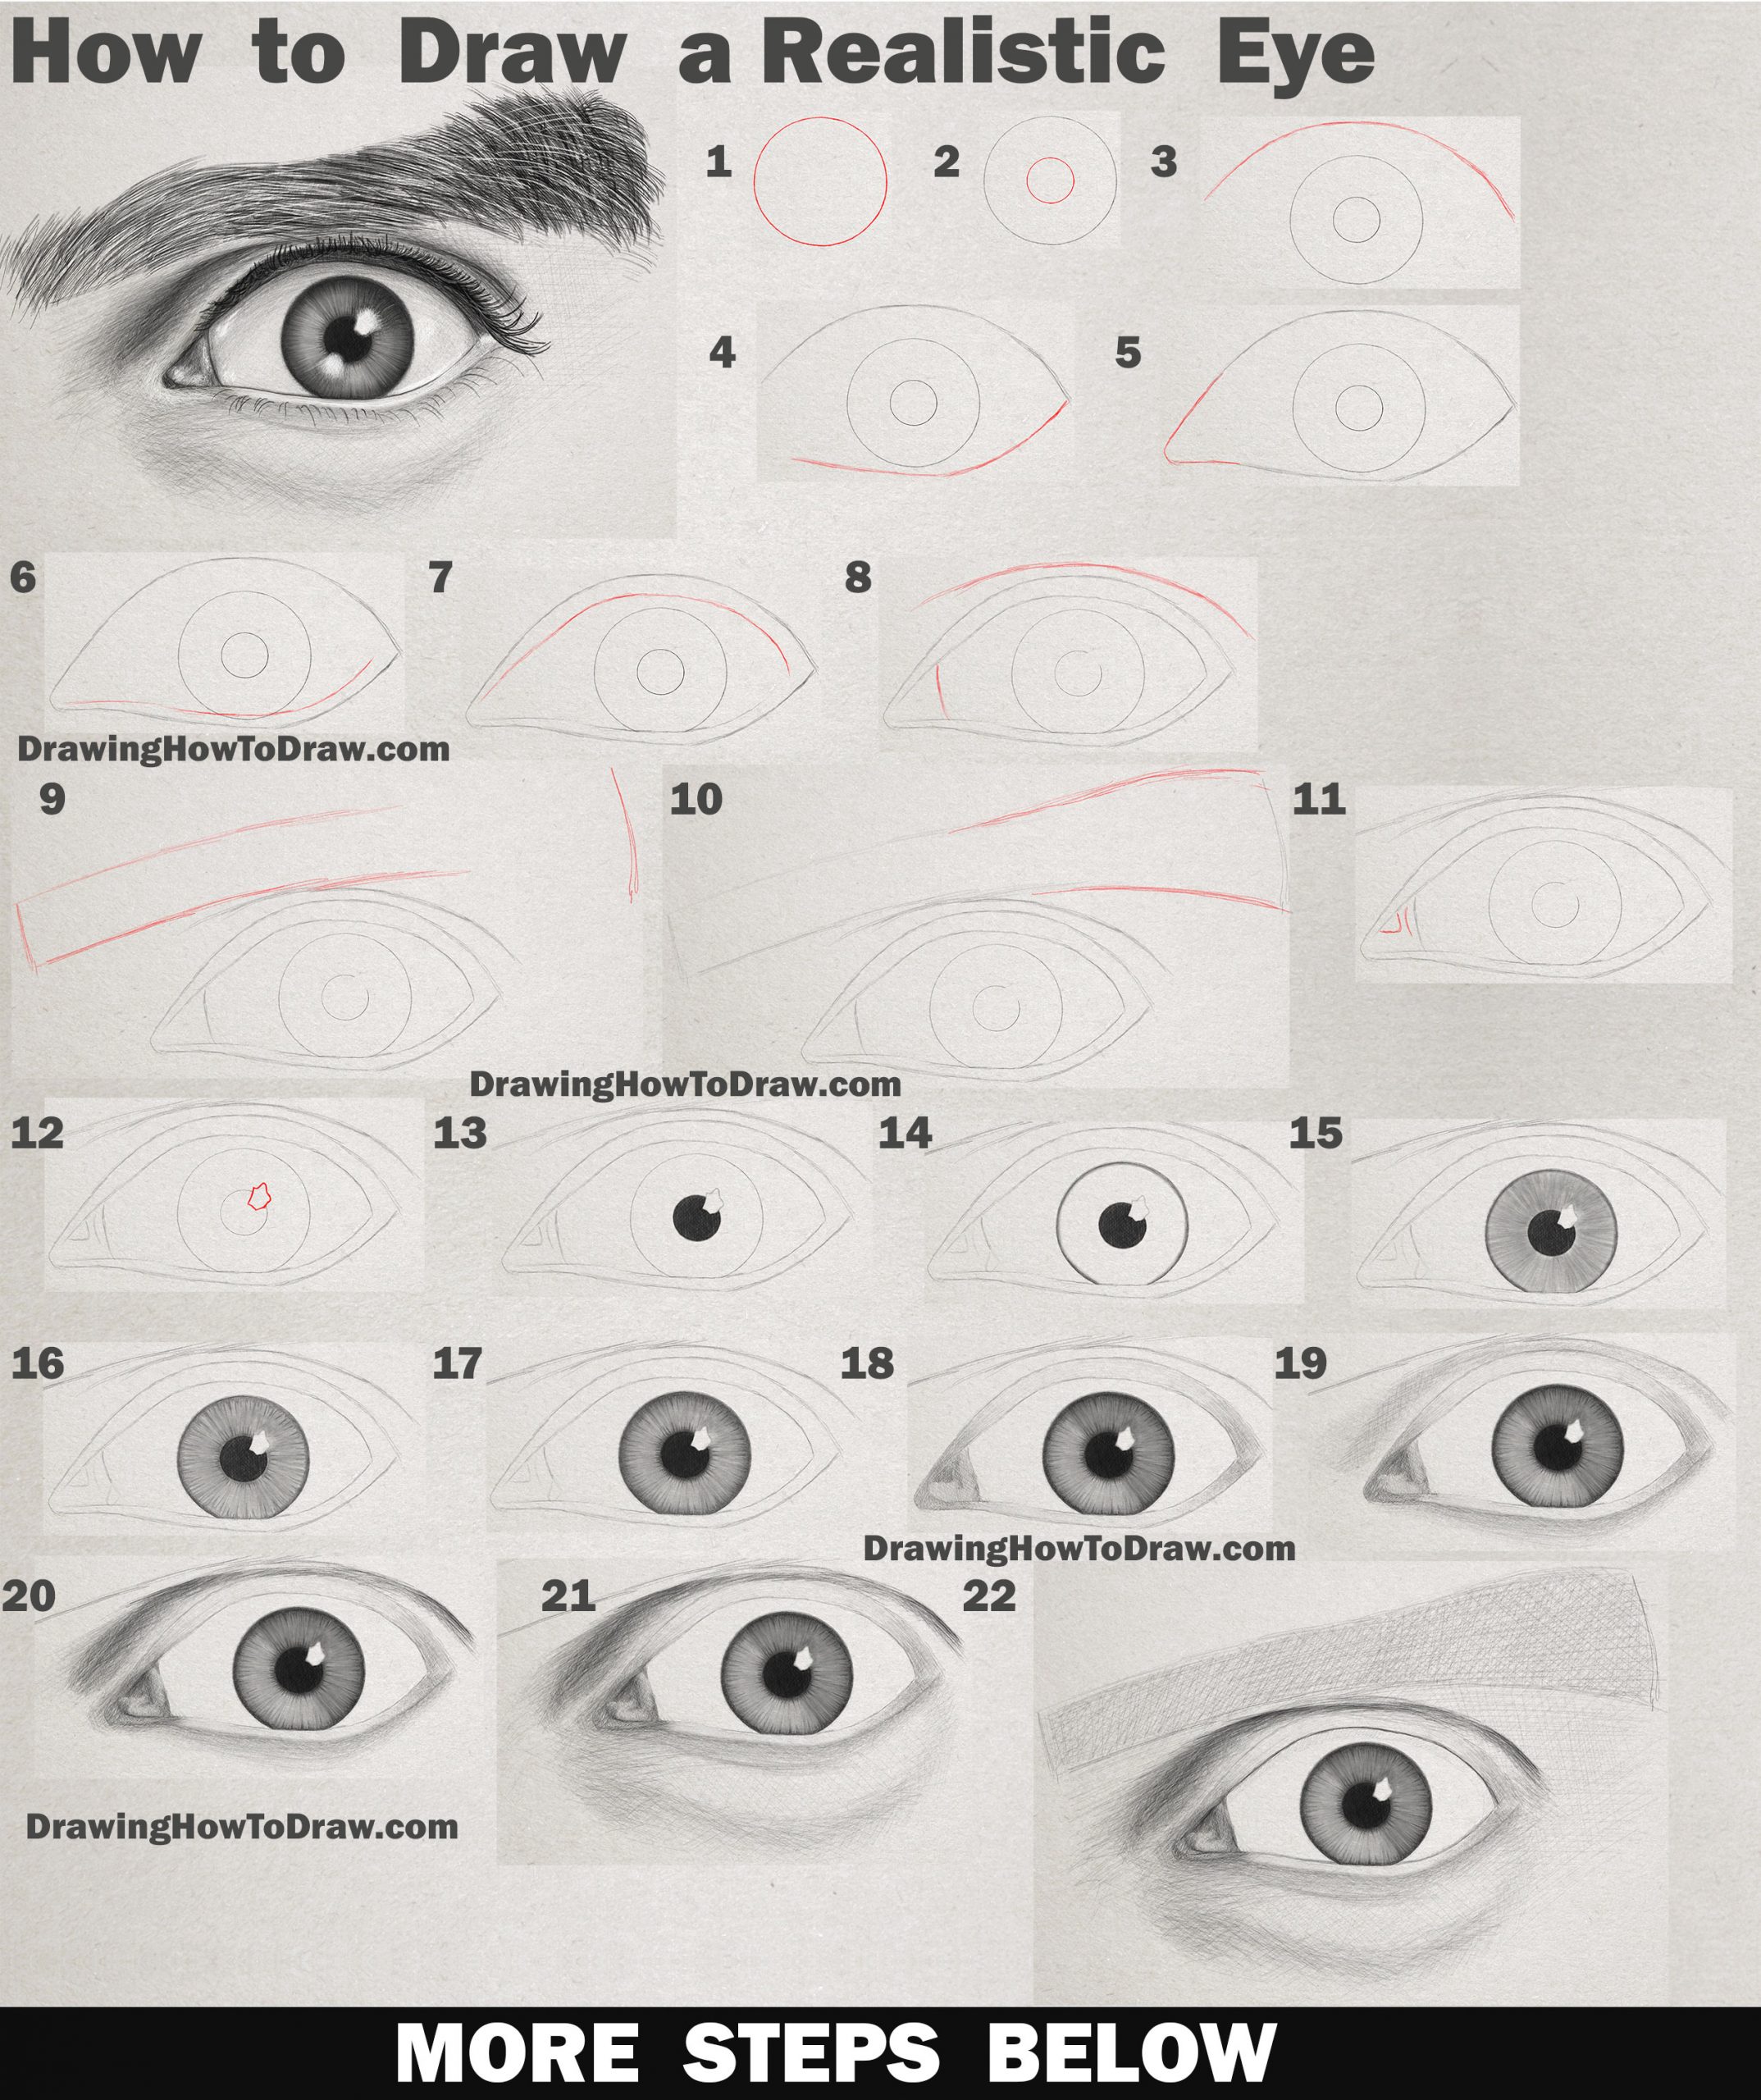 How to Draw an Eye - Realistic Man's Eye - Step by Step Drawing